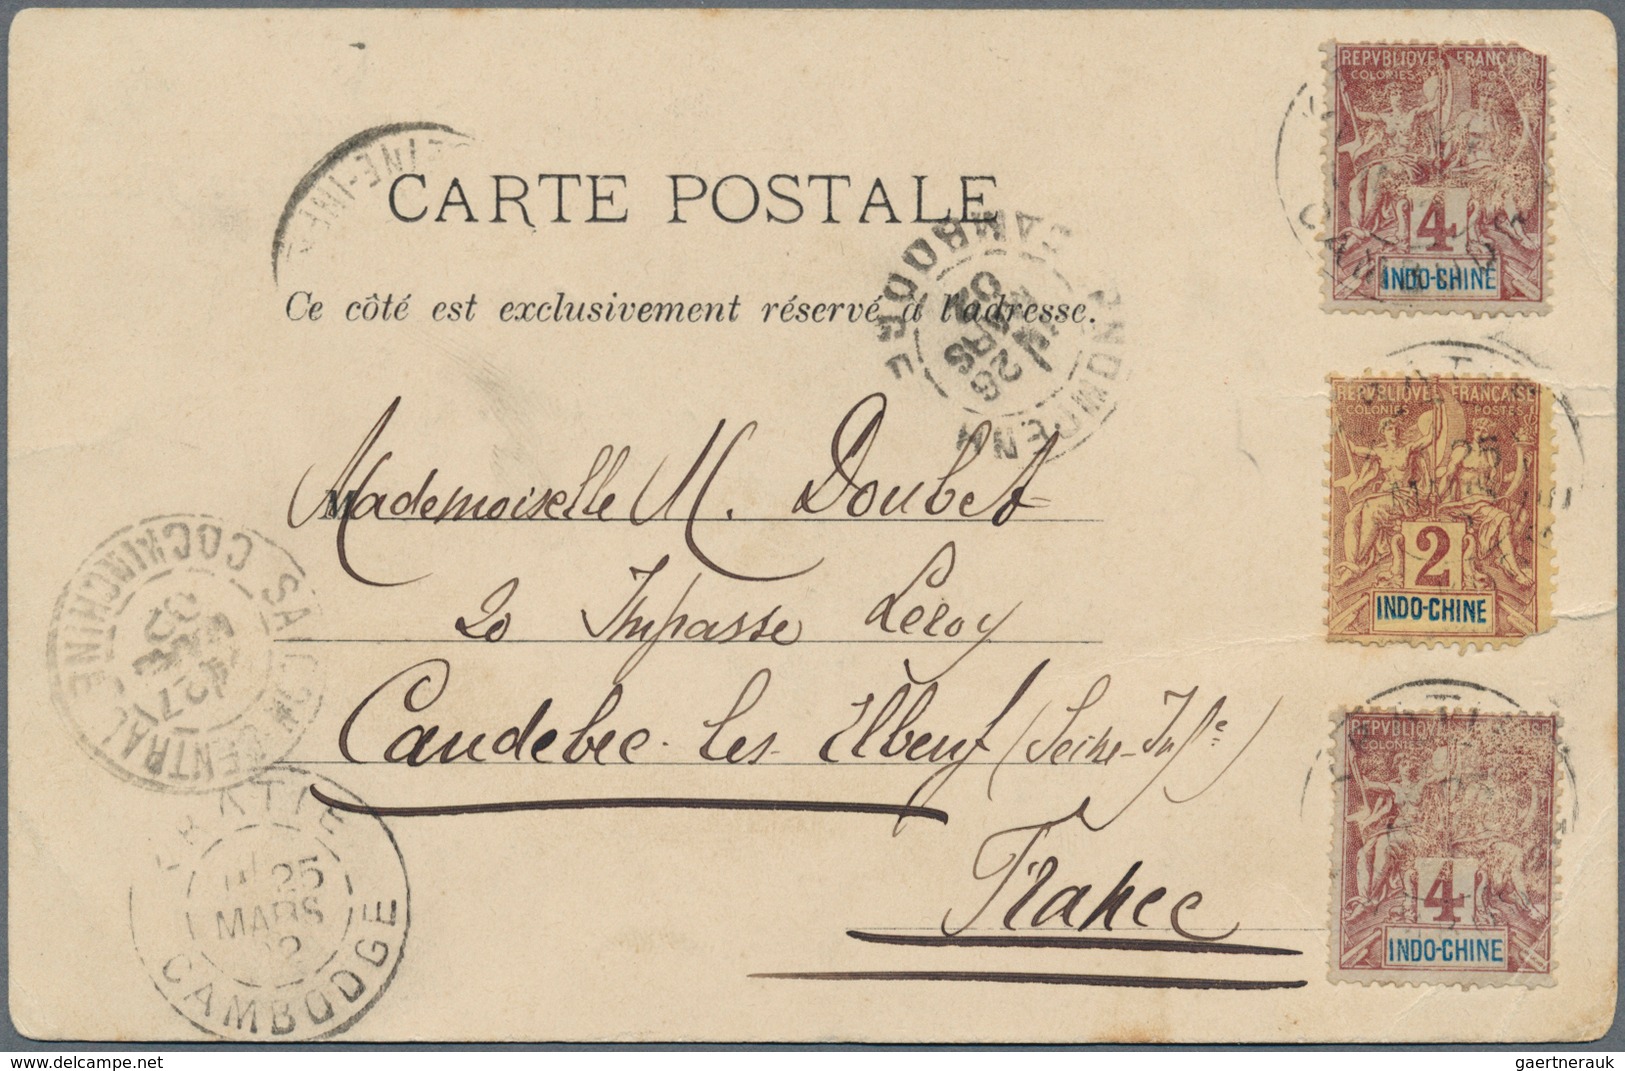 Kambodscha: 1892/1907, Two Ppc: 10 C. Franking (slight Faults) Used From "KRATIE 25 MARS 92" To Fran - Cambodge